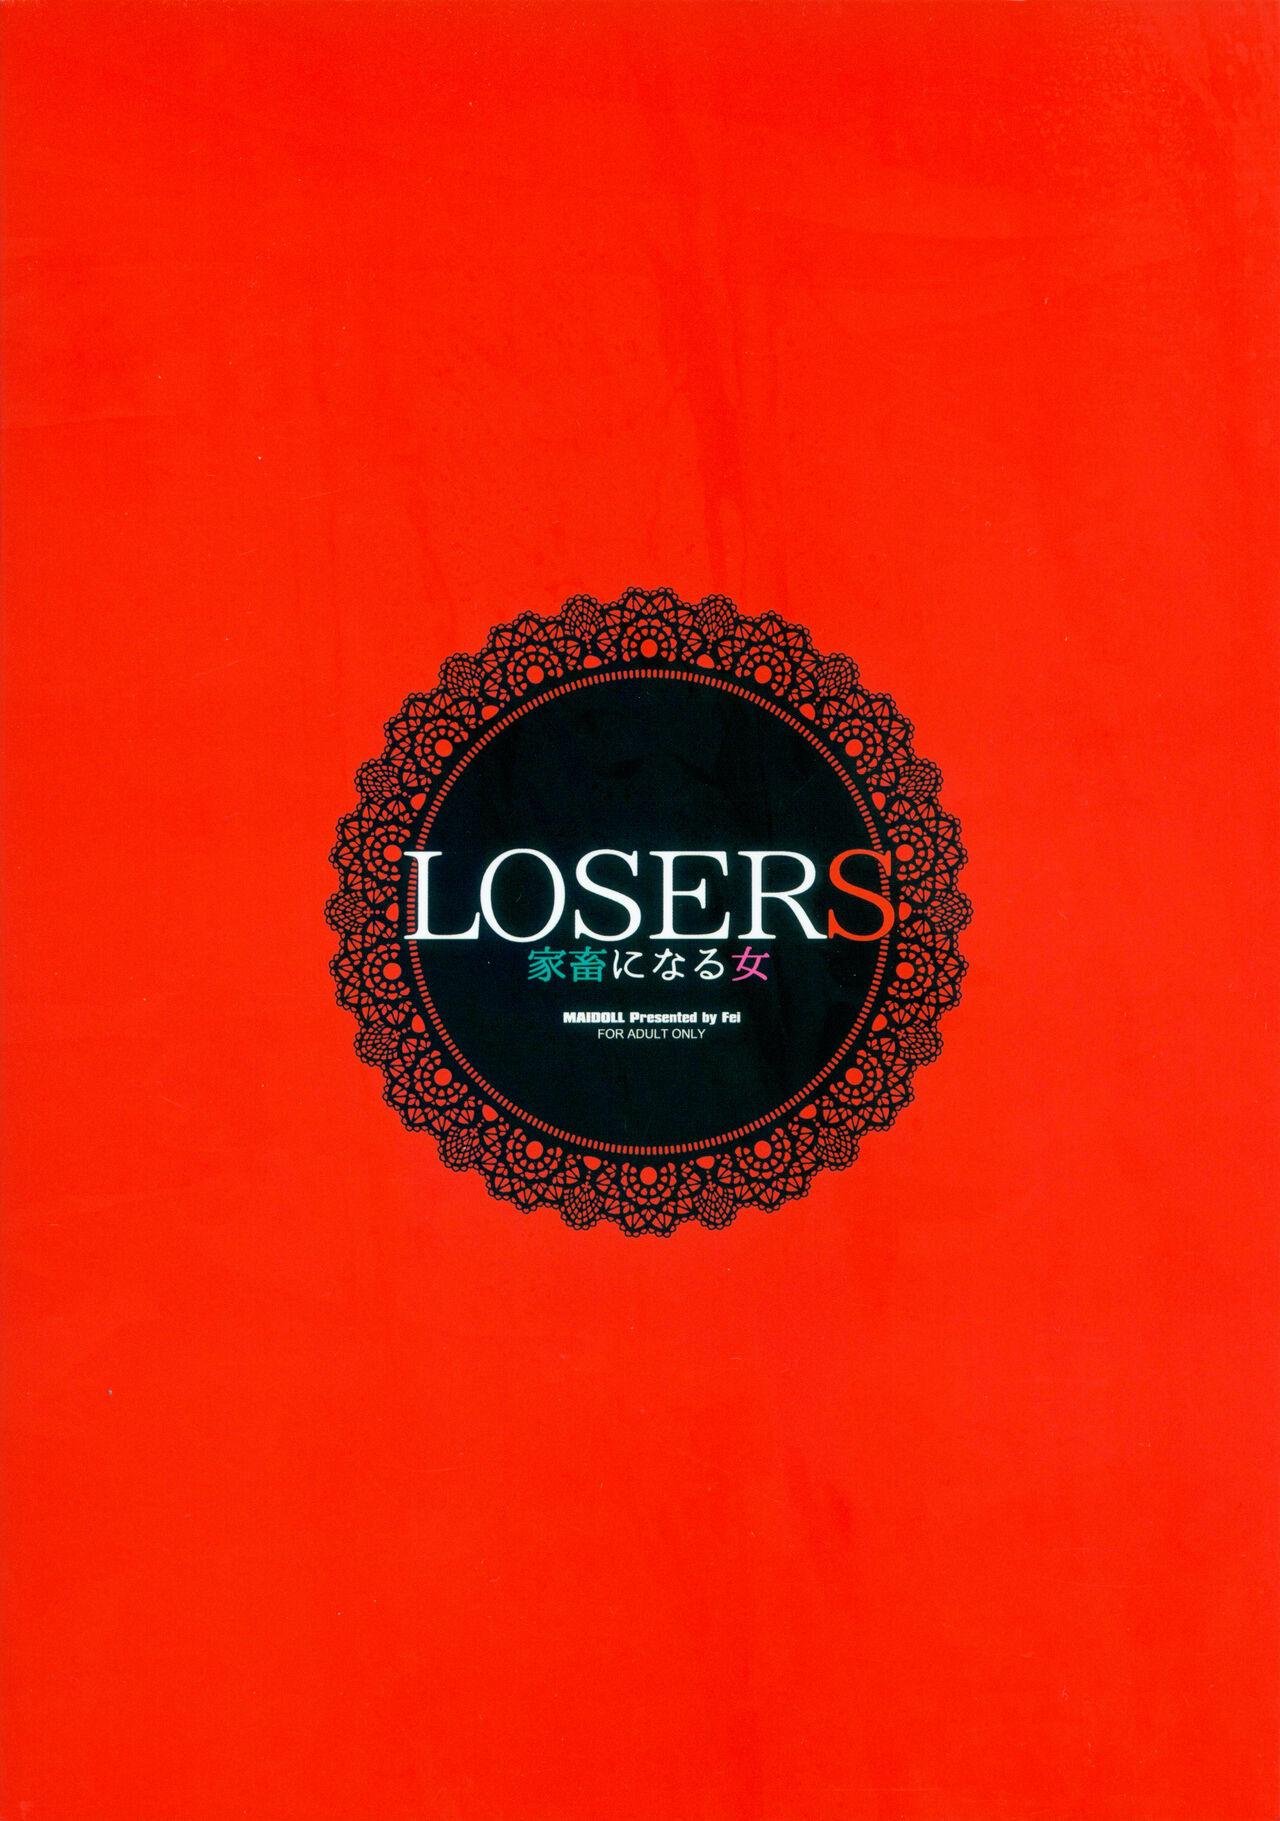 LOSERS 21